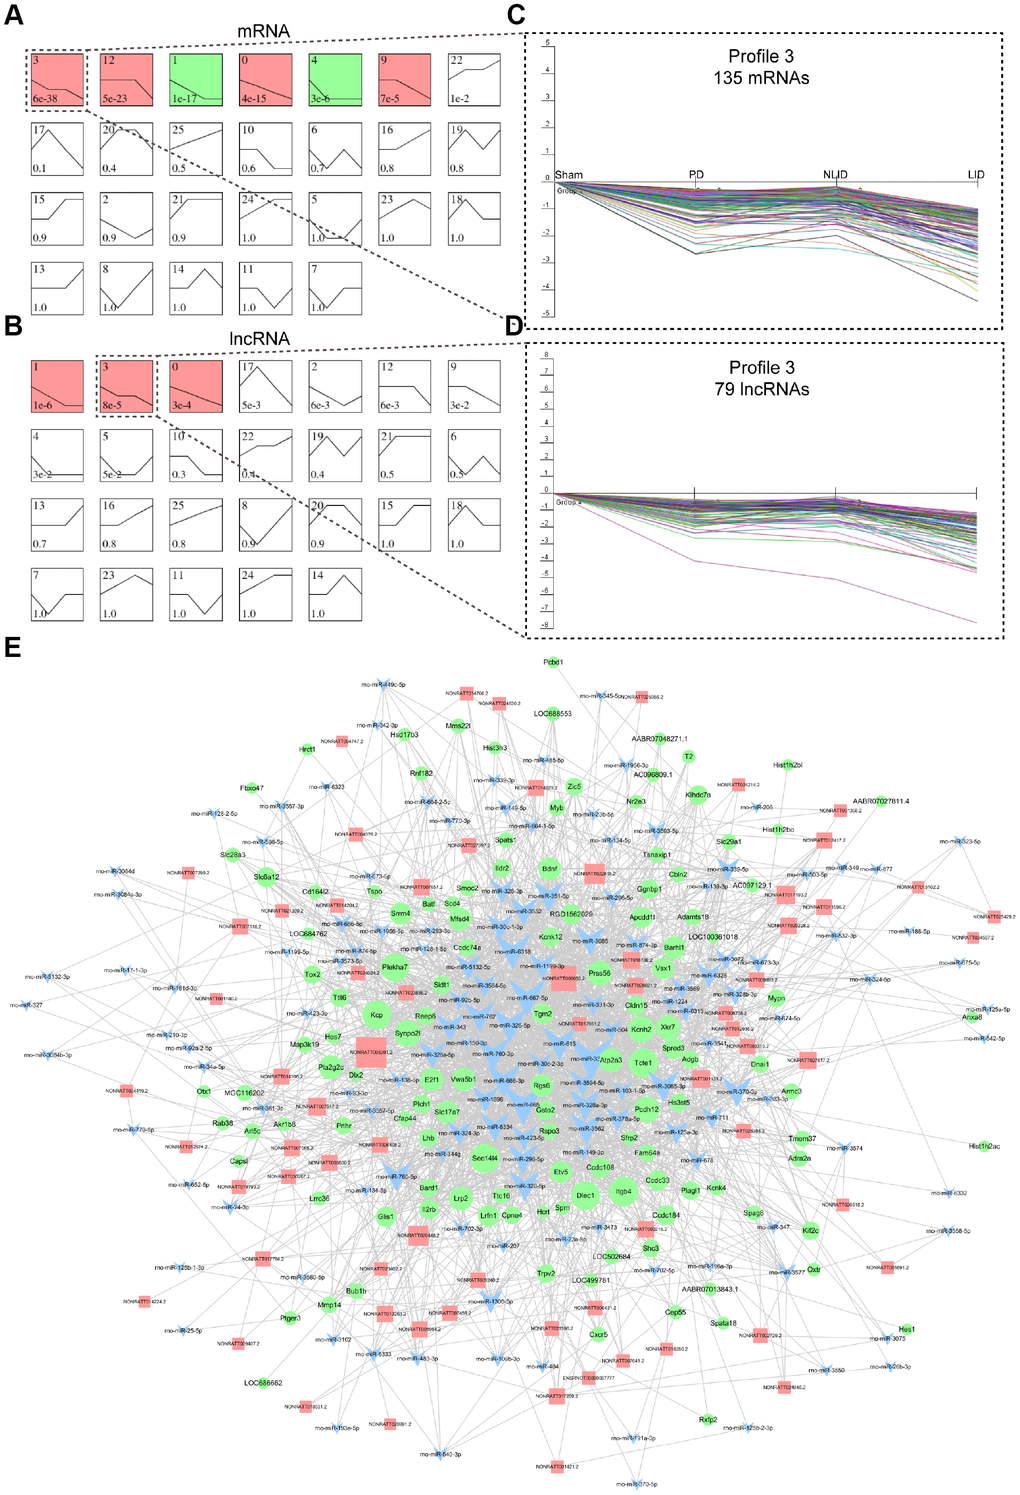 LncRNA and mRNA expression signatures of PD and LID rats. (A, B) Dynamic expression analyses of differentially expressed coding (A) and non-coding (B) genes. Differential expression patterns were determined based on 26 model profiles; each box represents a model expression profile, with the model profile number and P value shown in the box. Expression profiles with significant differences (P C, D) Profile 3 of mRNAs (C) and lncRNAs (D) in dotted boxes are shown in detail to the right. The horizontal axis shows the four groups (Sham, PD, NLID, and LID) and the vertical axis shows gene expression level. Each curve represents a single gene. (E) ceRNA network of lncRNAs with mRNAs in profile 3. LncRNAs, mRNAs, and miRNAs are represented by red squares, green circles, and blue triangles, respectively.